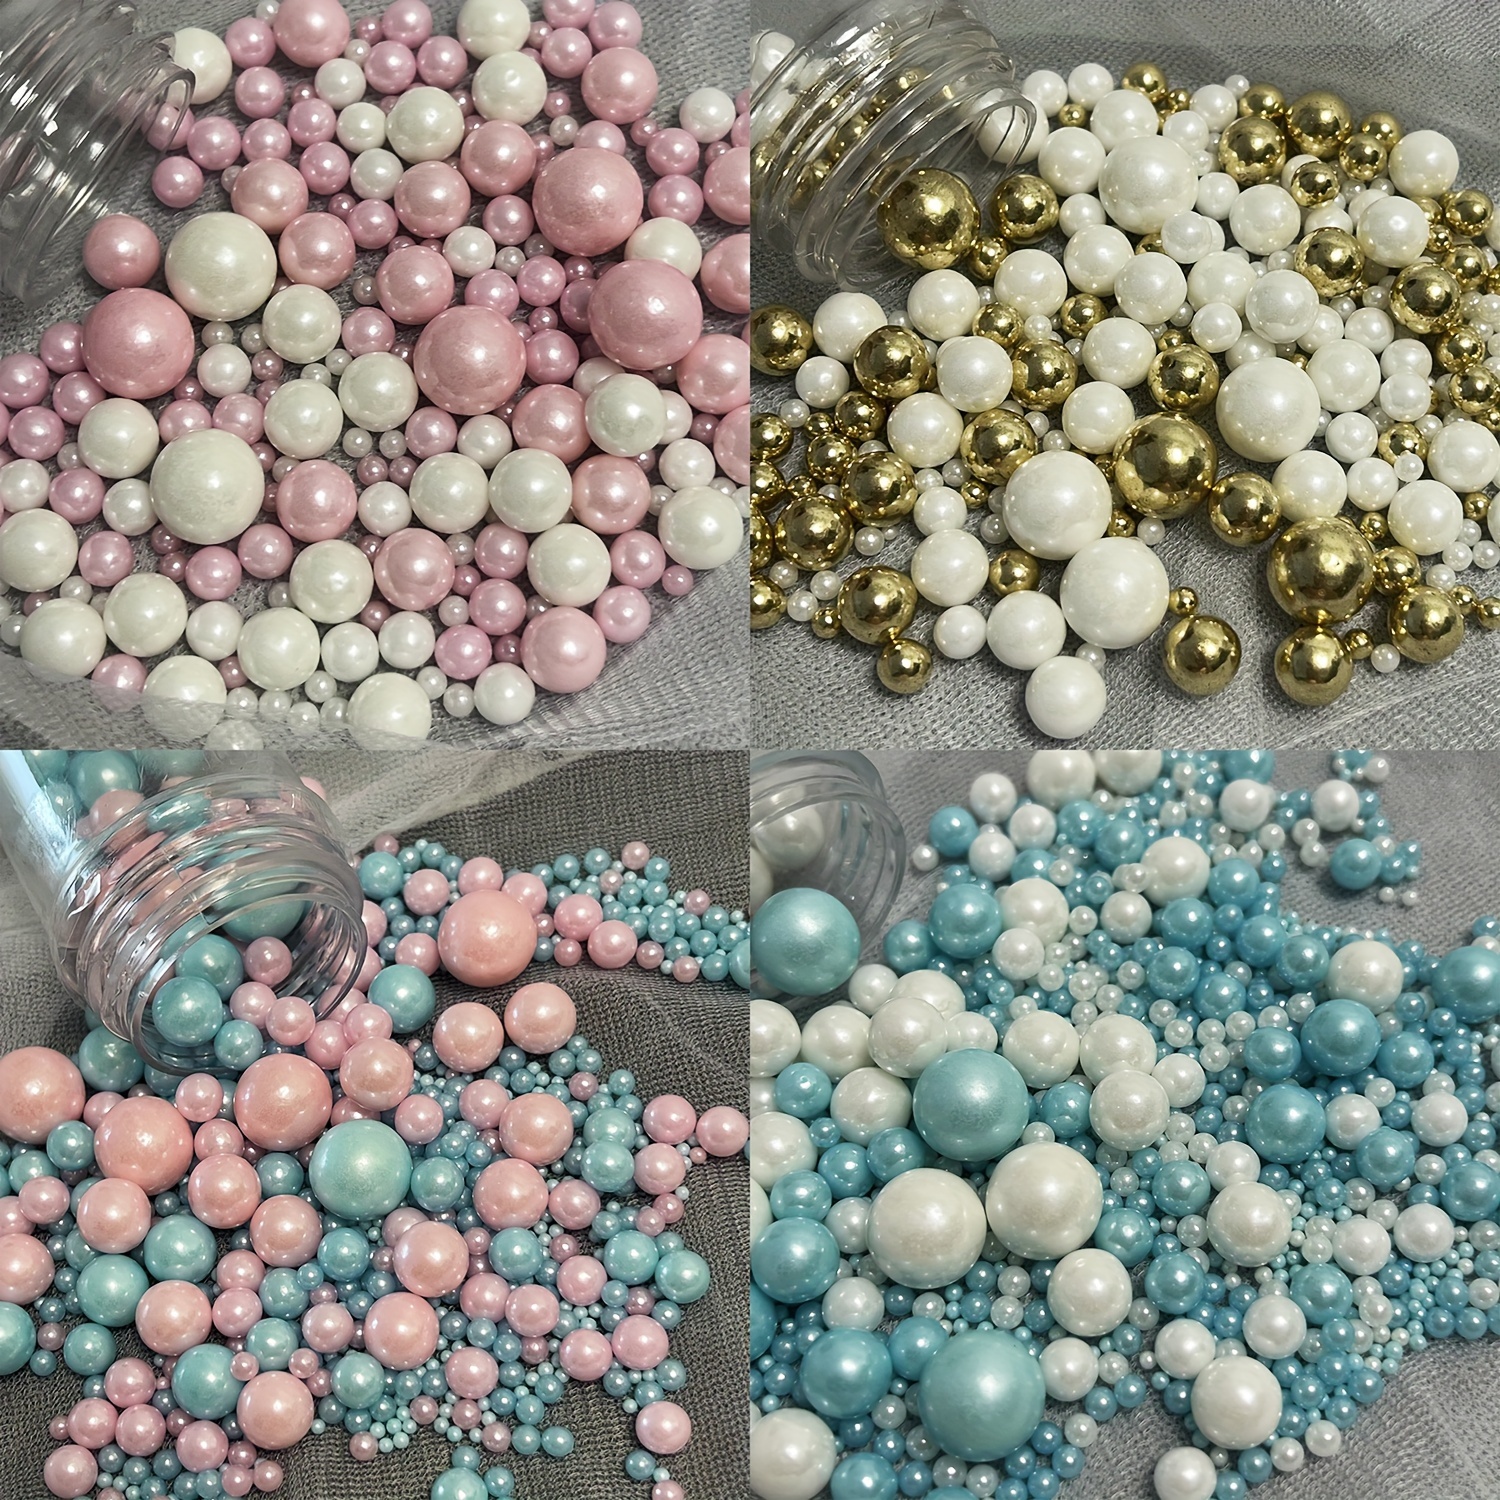 

85g Assorted Pearls Cake Decorations - Plastic Non-edible Cupcake Toppers For Celebrations, Wedding, Shower, Party, Christmas - No Electricity, Featherless Baking Supplies